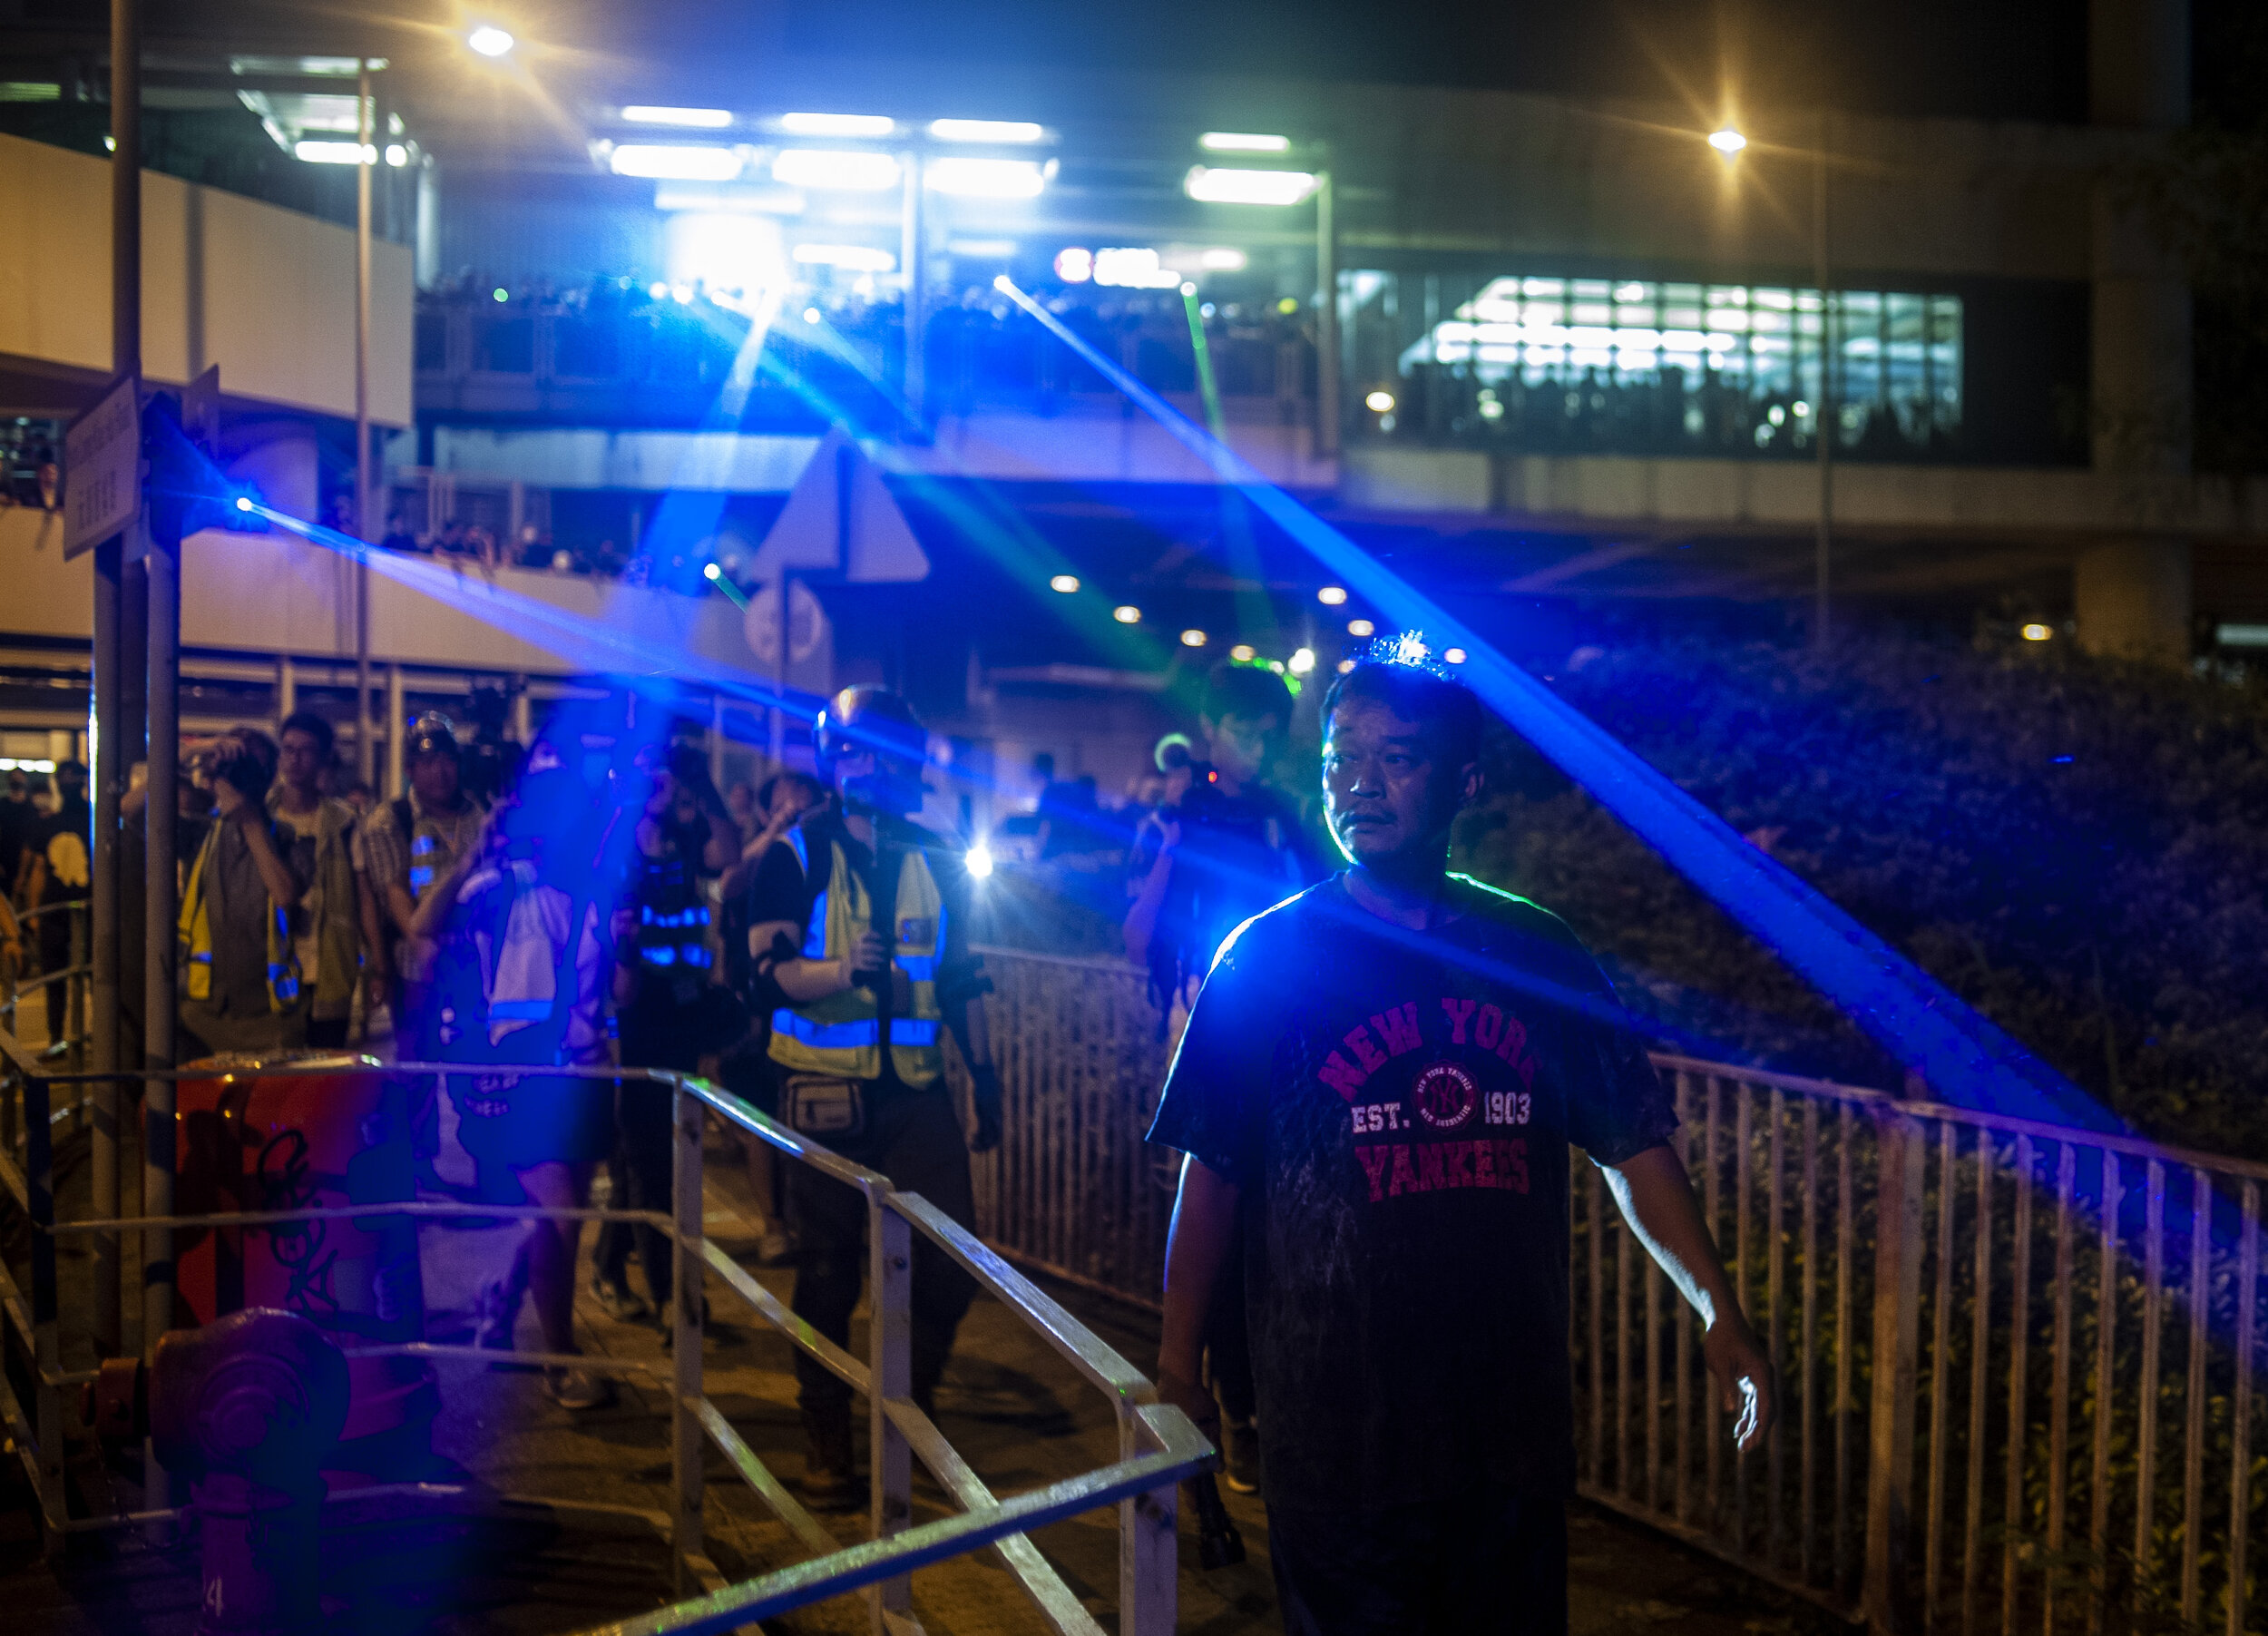  Protesters occupying Yeung Long Metro Station shine high powered laser pointers at a man who expressed pro-Chinese sentiments and argued with pro-democracy protesters during a sit-in protest held at the Yeung Long Station on August 21, 2019. The pro